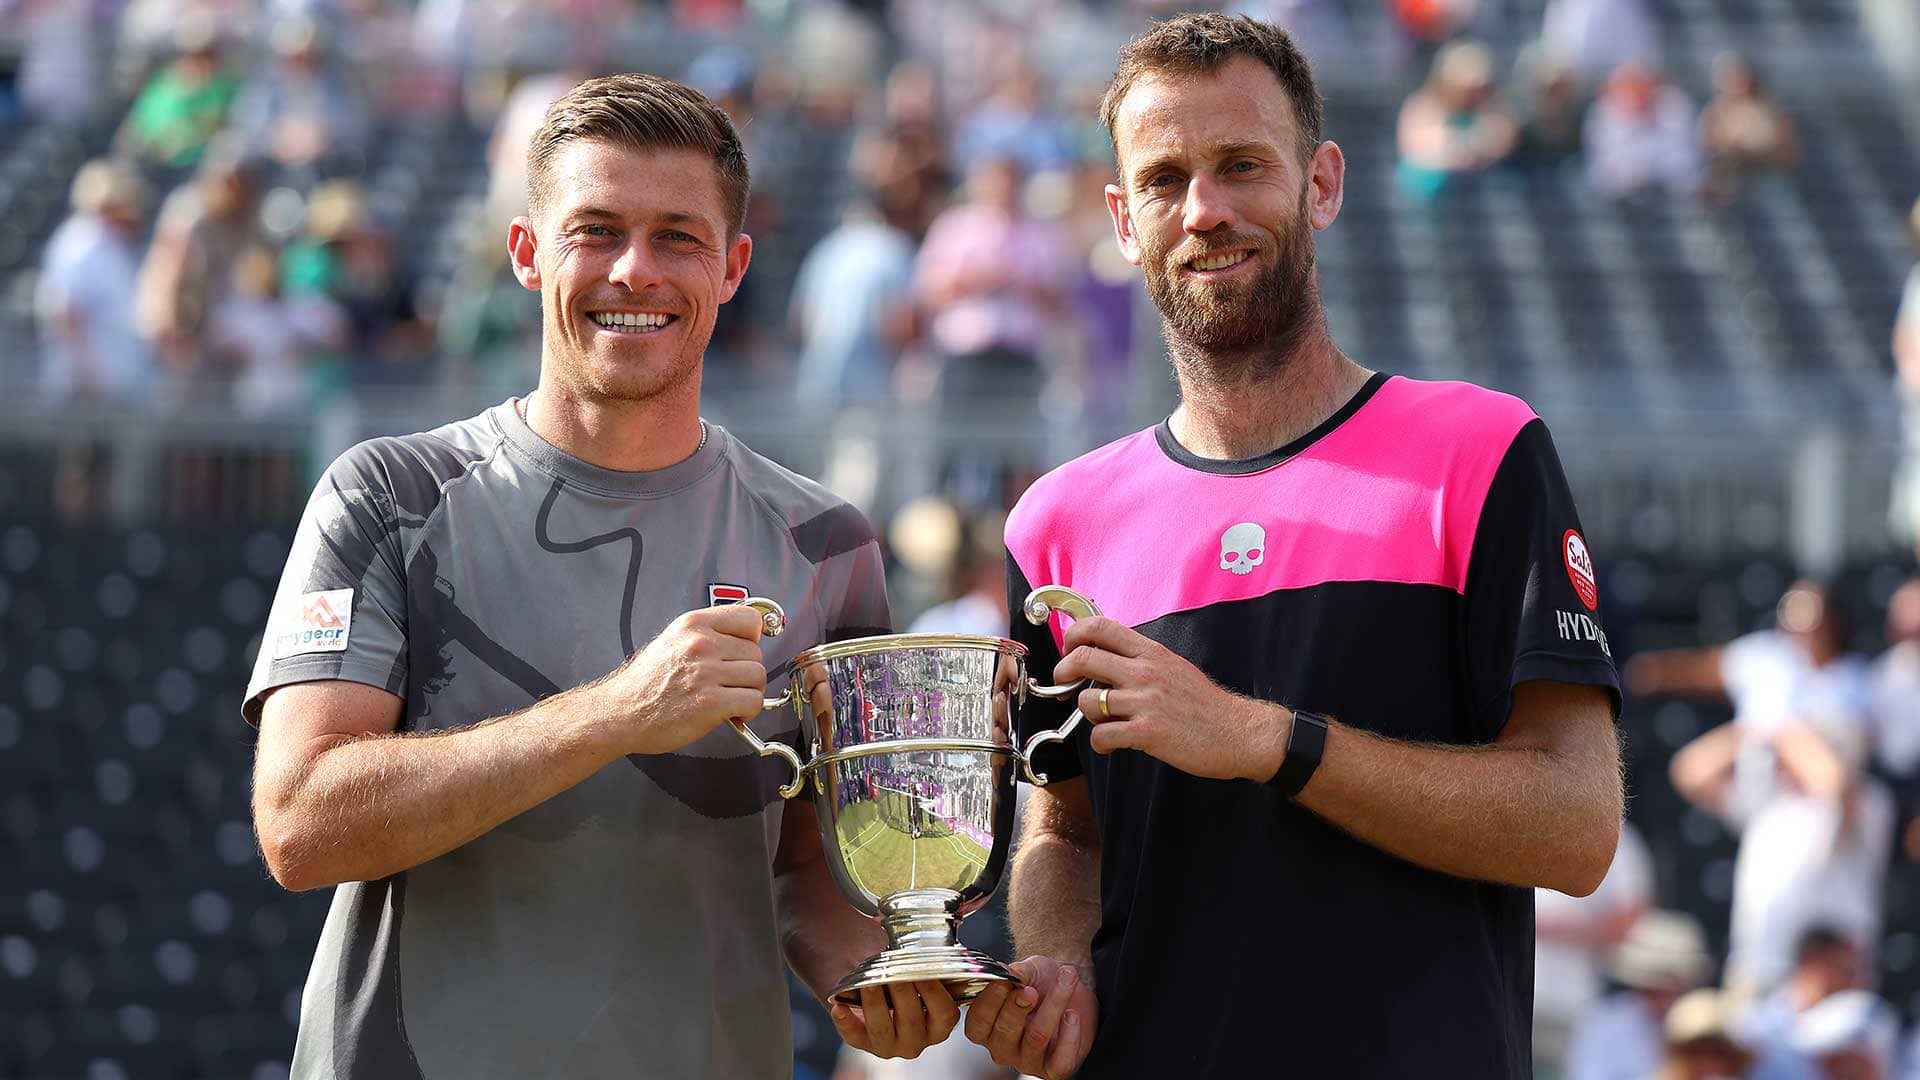 Neal Skupski and Michael Venus lift the trophy in London.